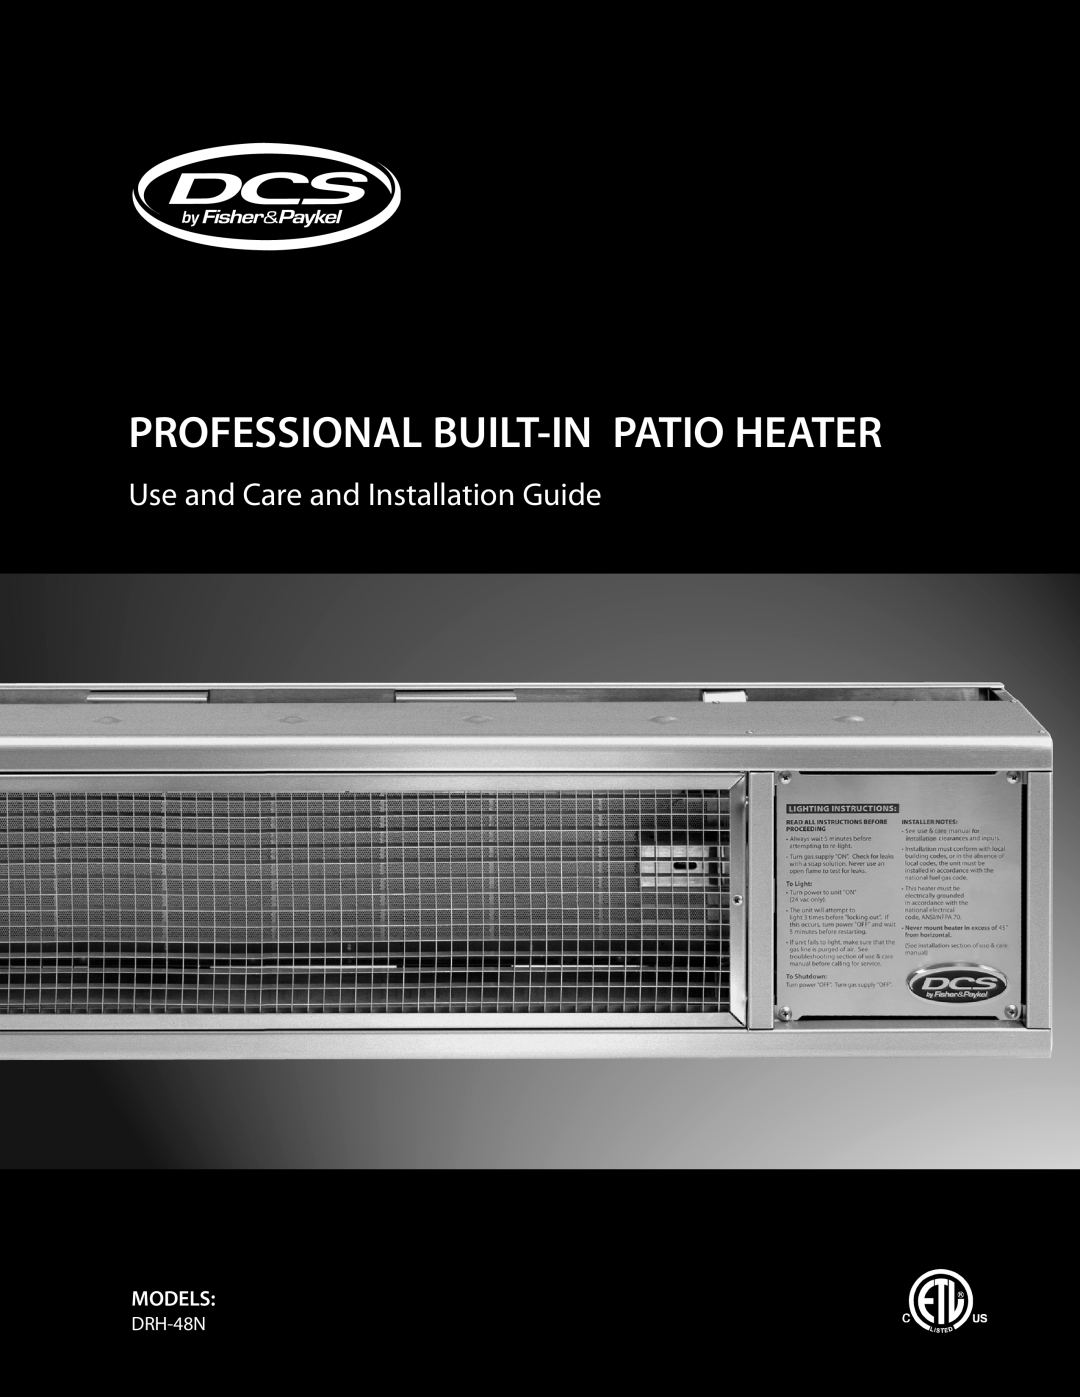 DCS DRH-48N manual Professional Built-In Patio Heater, Use and Care and Installation Guide, Models 